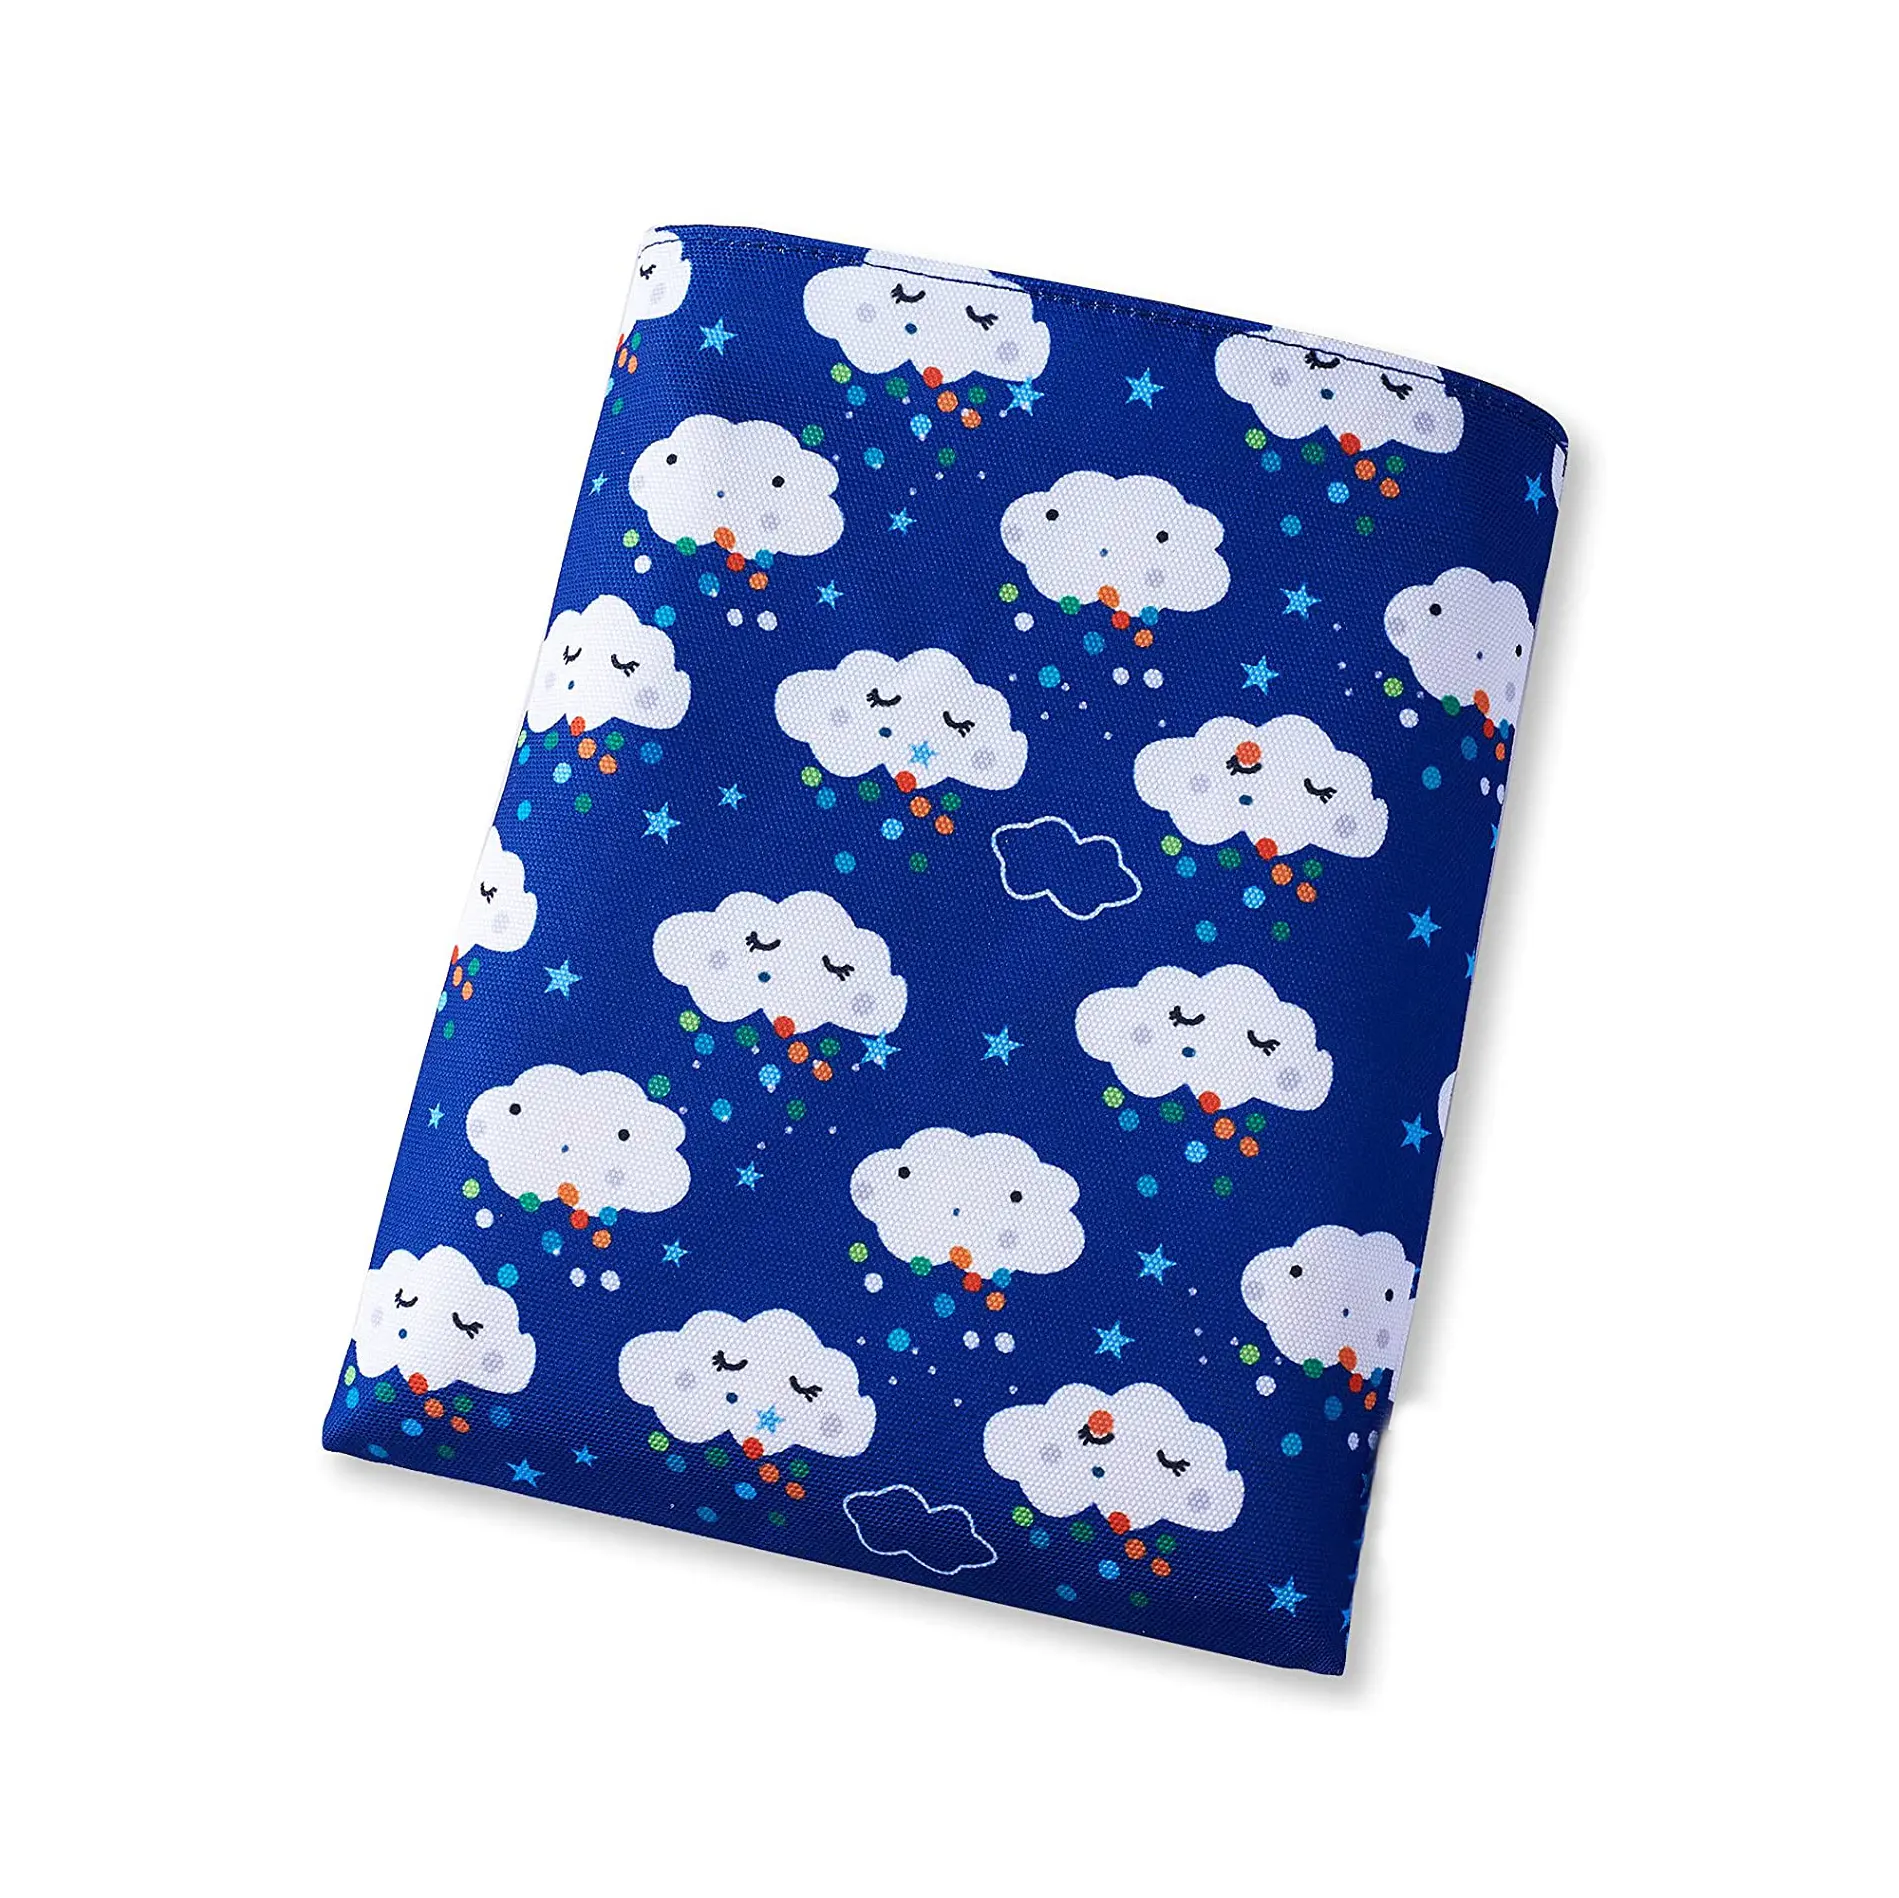 Portable book cover pouch sublimation printing cute book pad protector sleeve bag